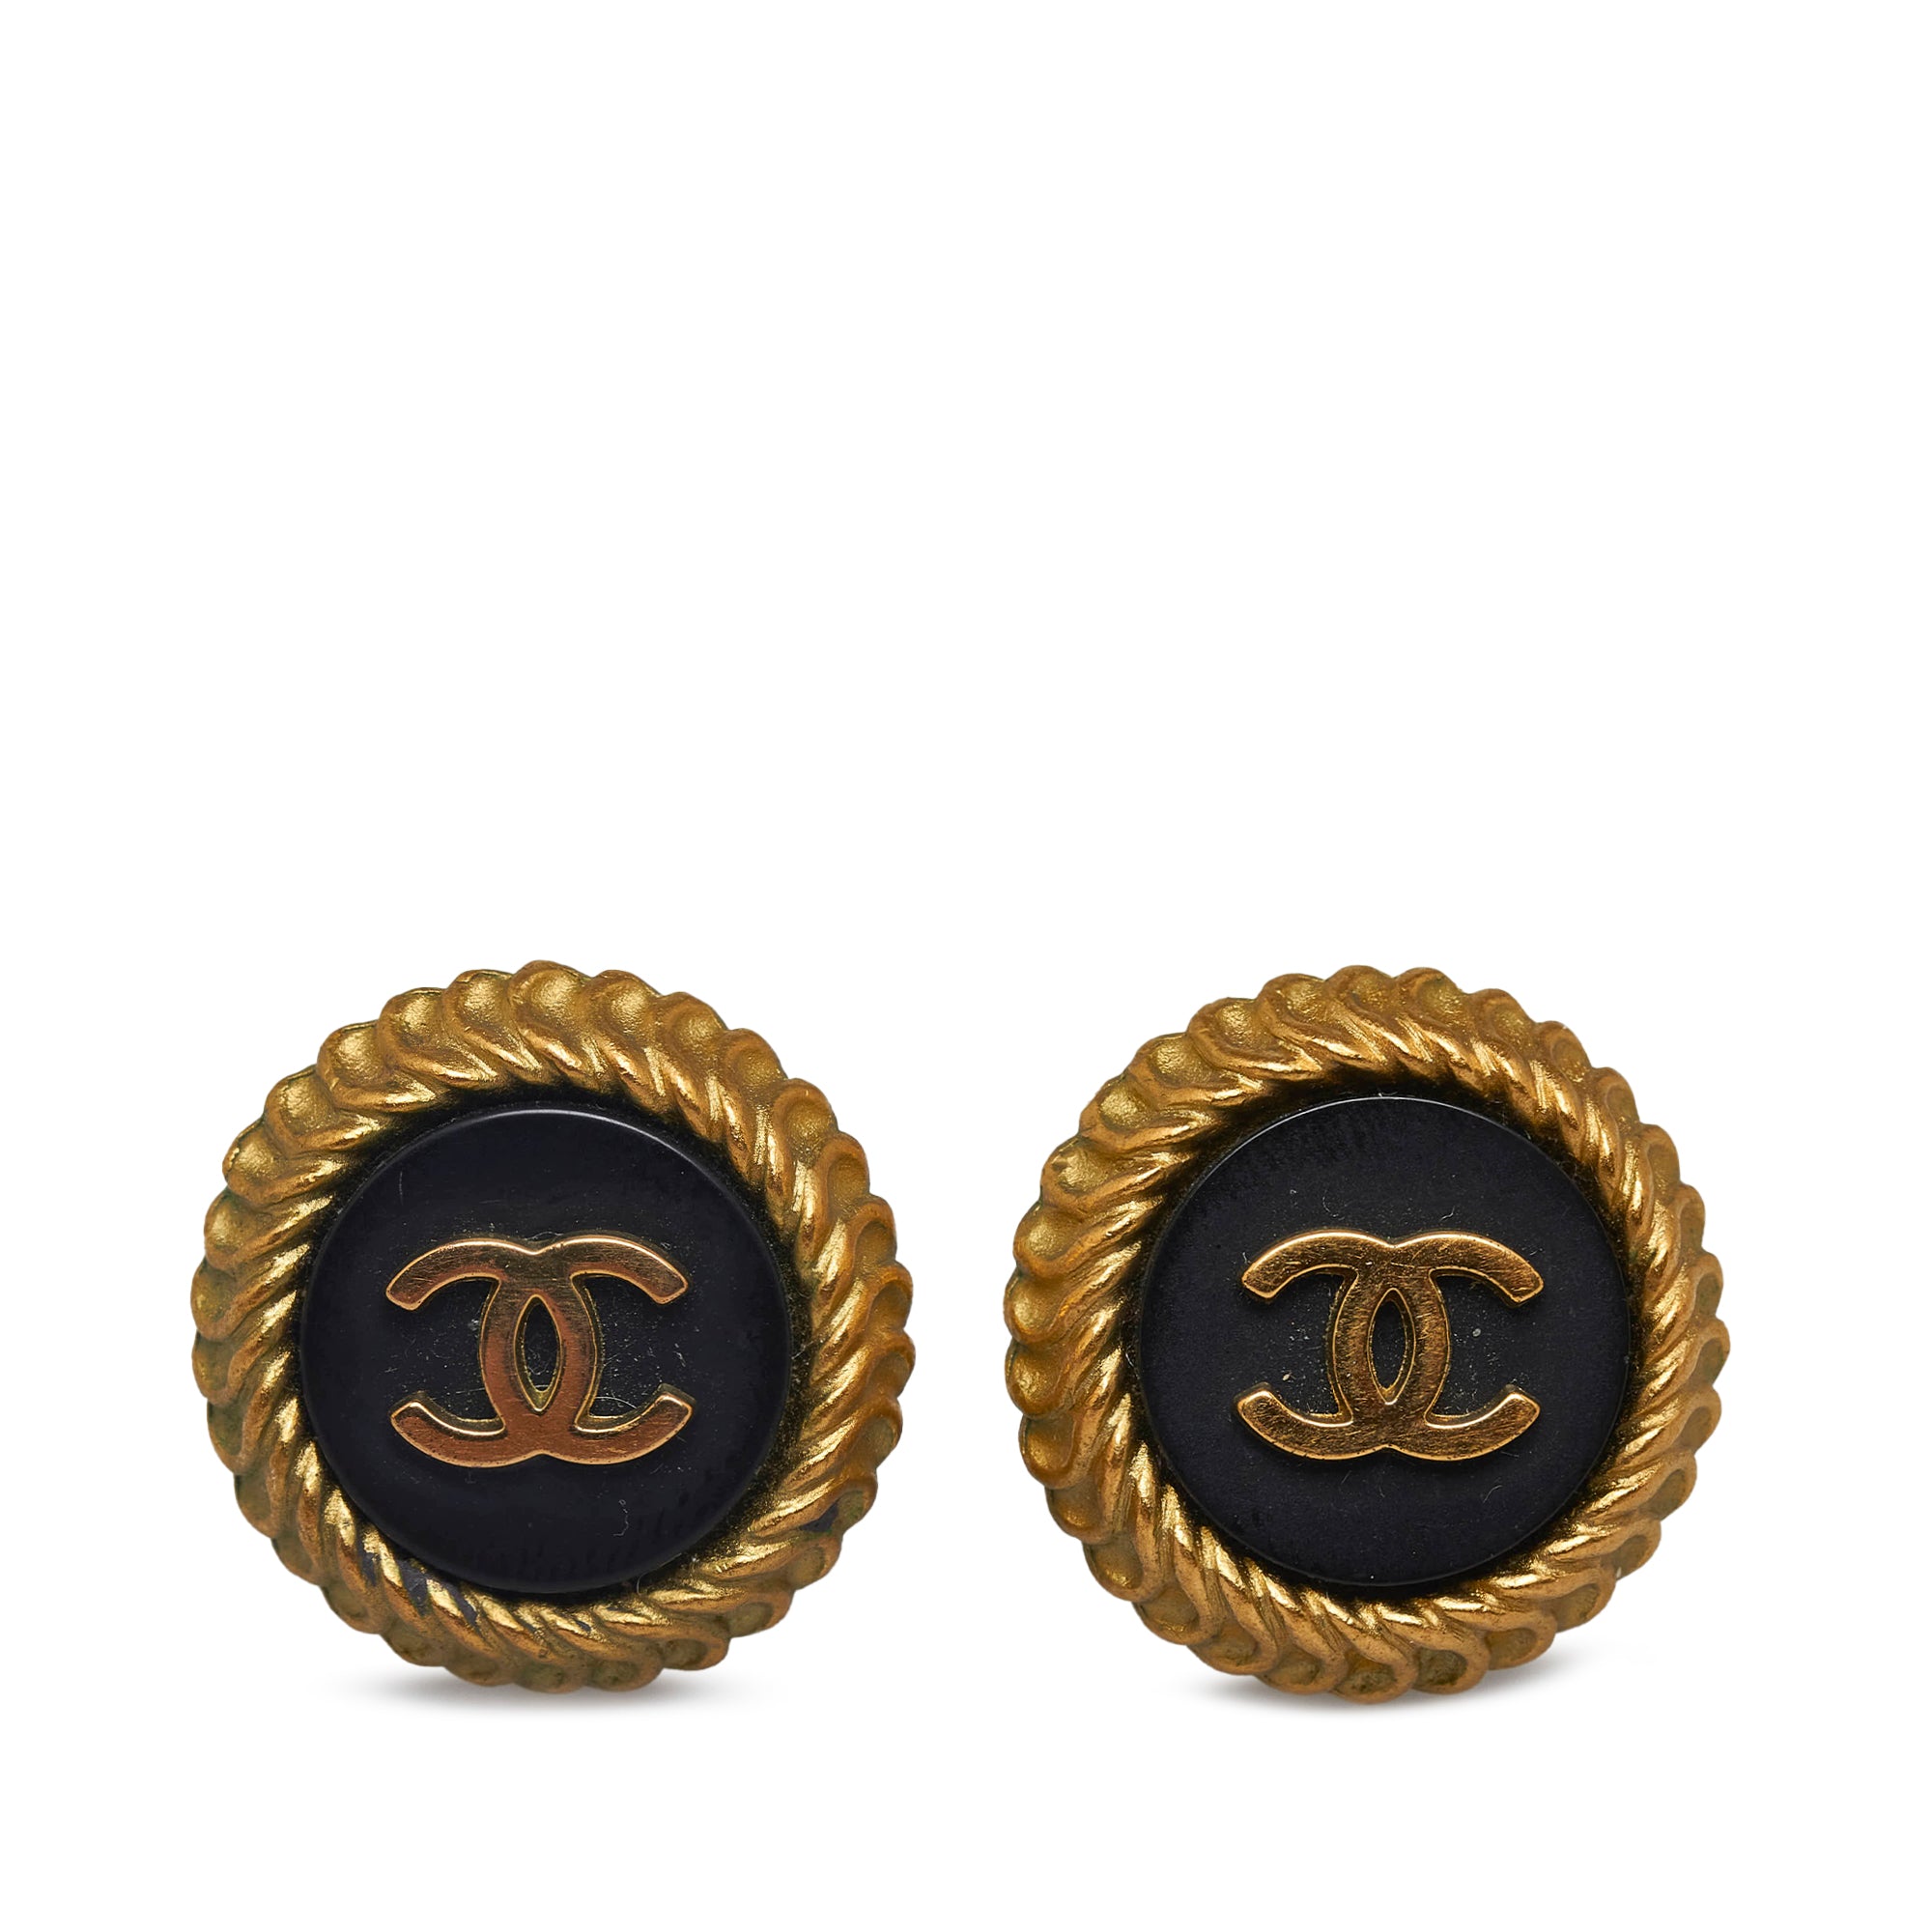 Vintage Chanel Black and Gold Round Earrings with CC Logo